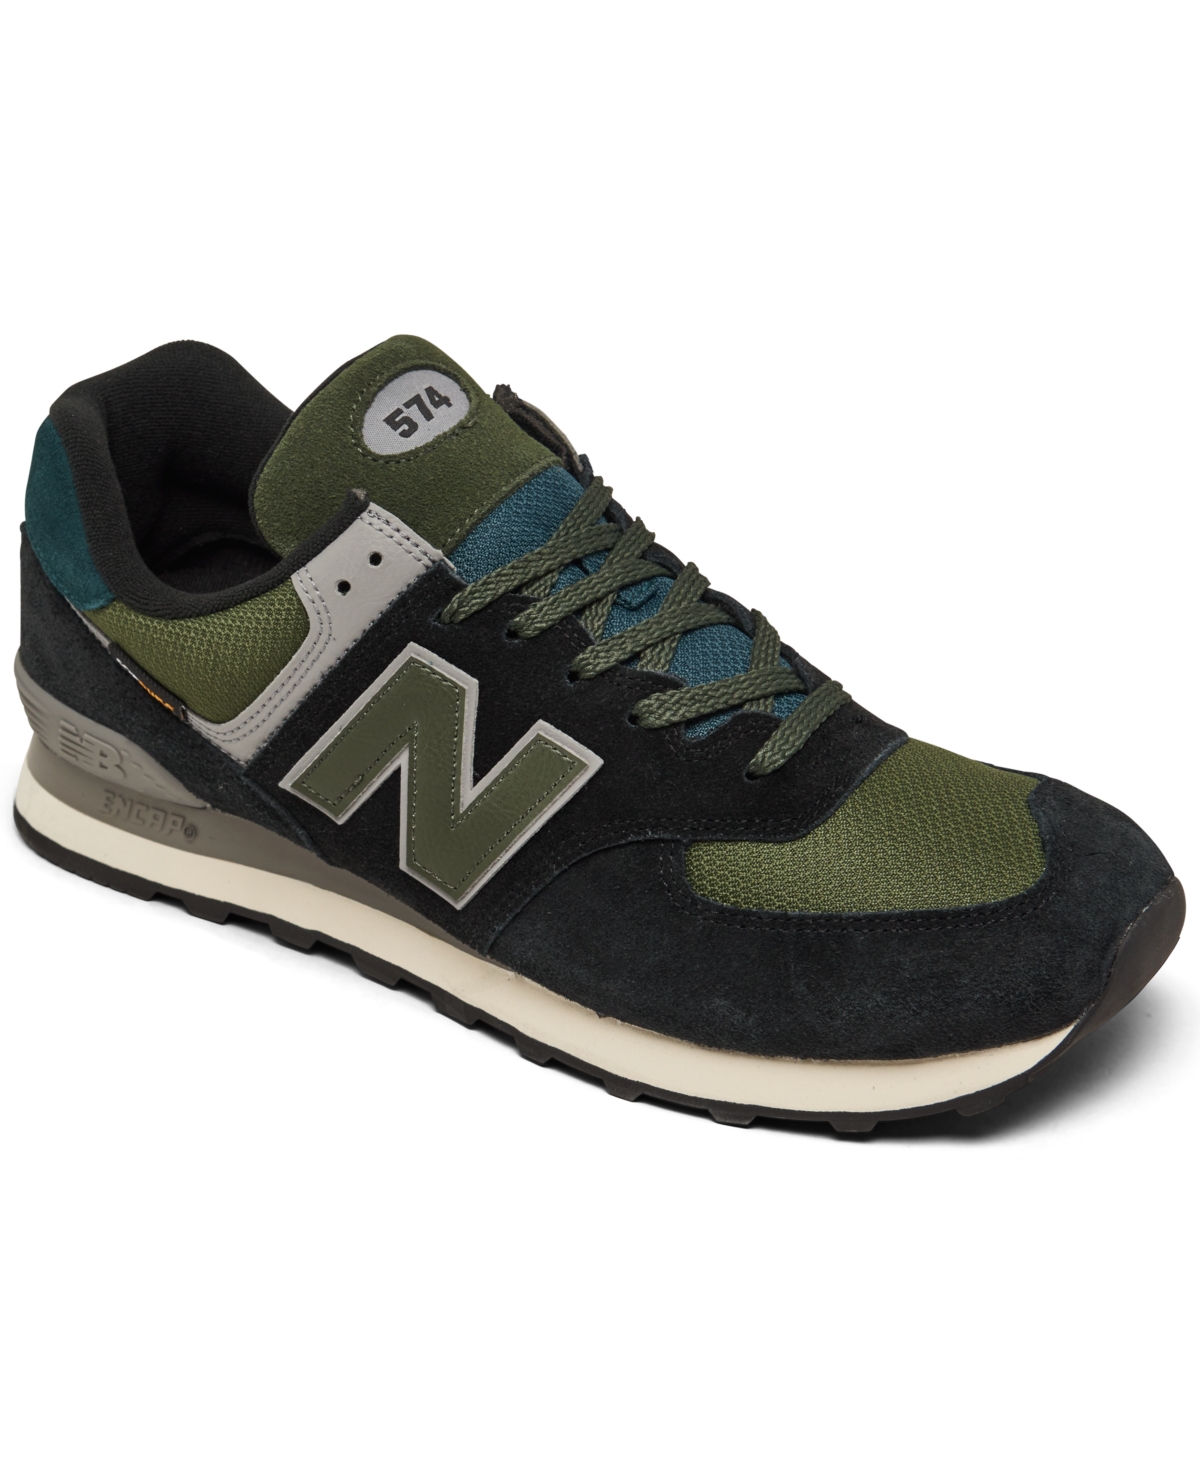 New Balance Men's 574 Casual Sneakers From Finish Line In Black,olive,teal